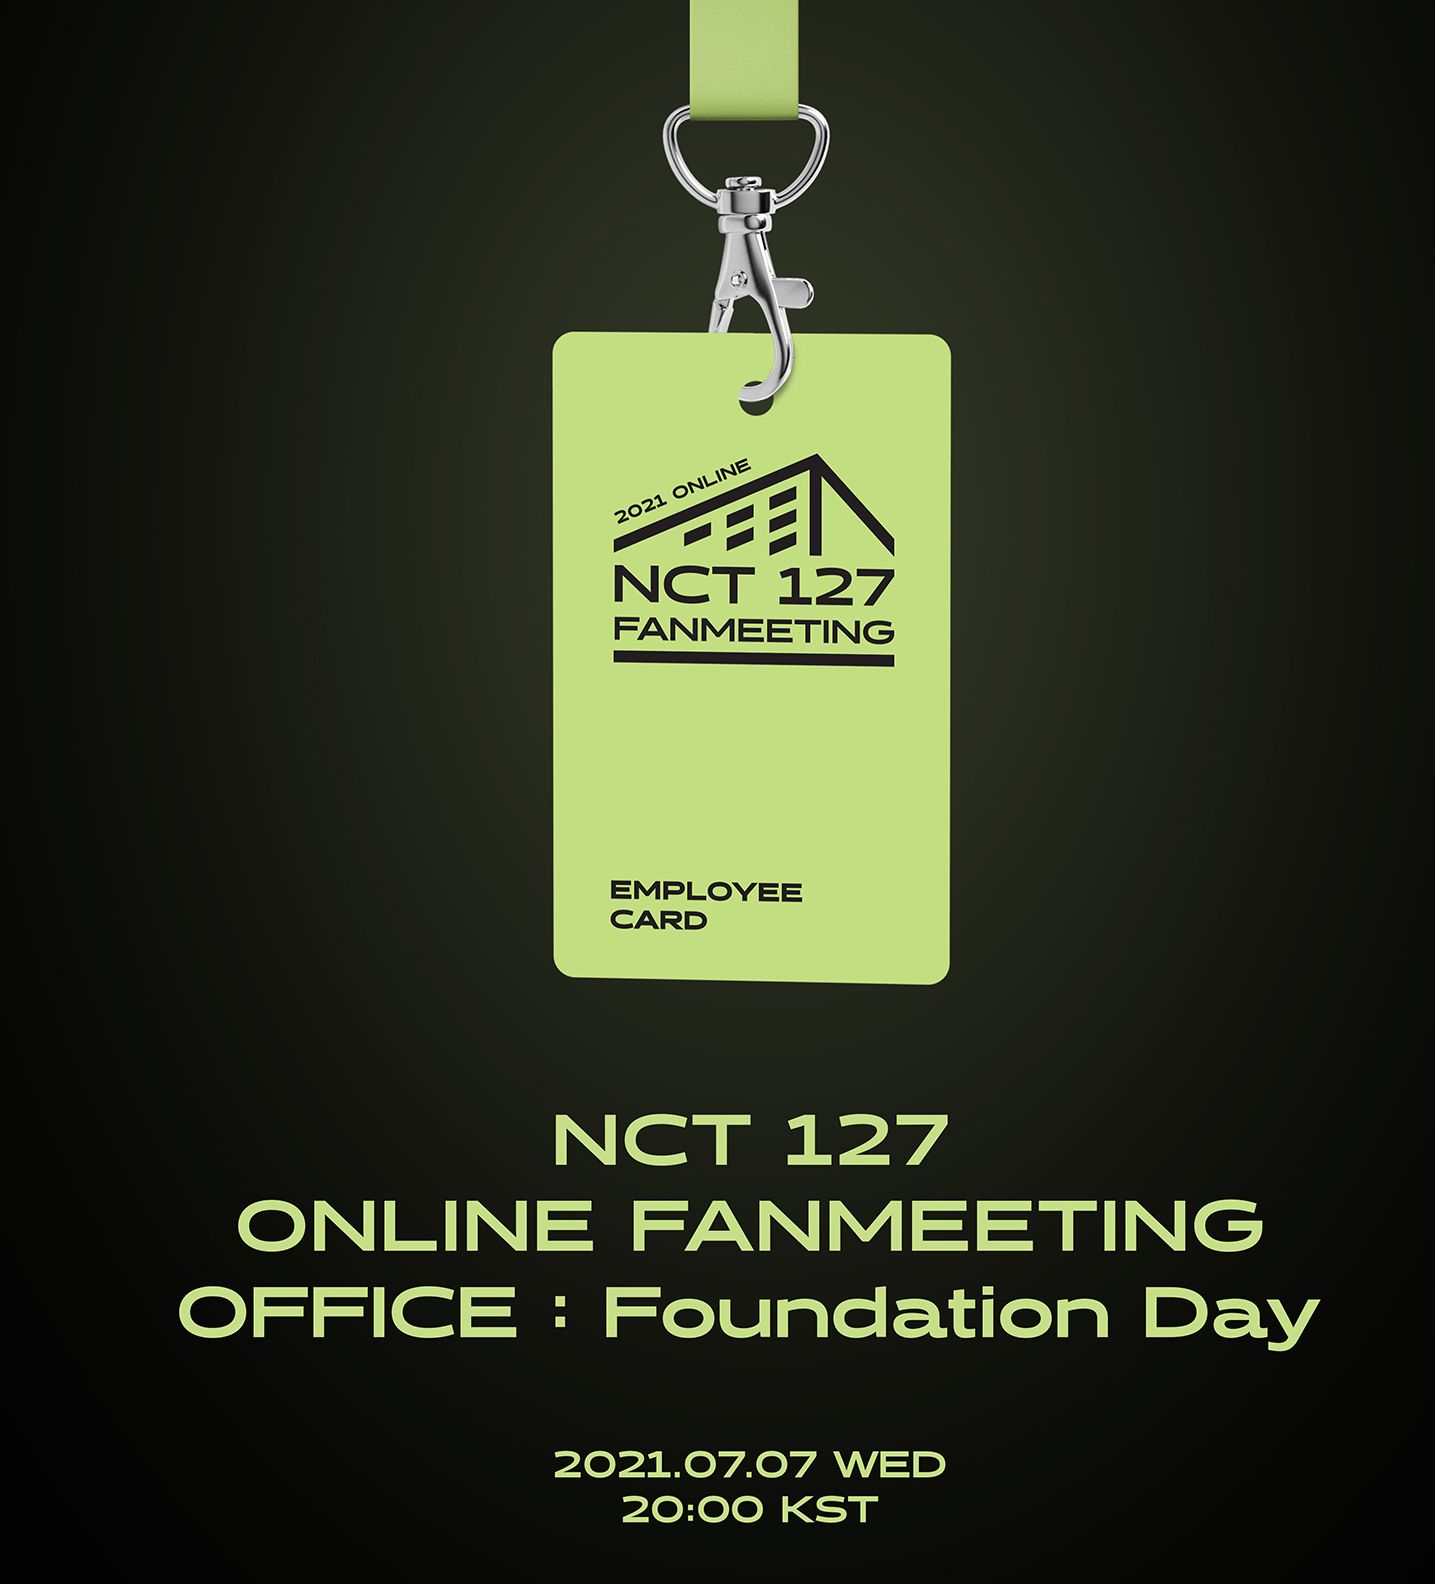 NCT 127 online FANMEETING office: Foundation Day